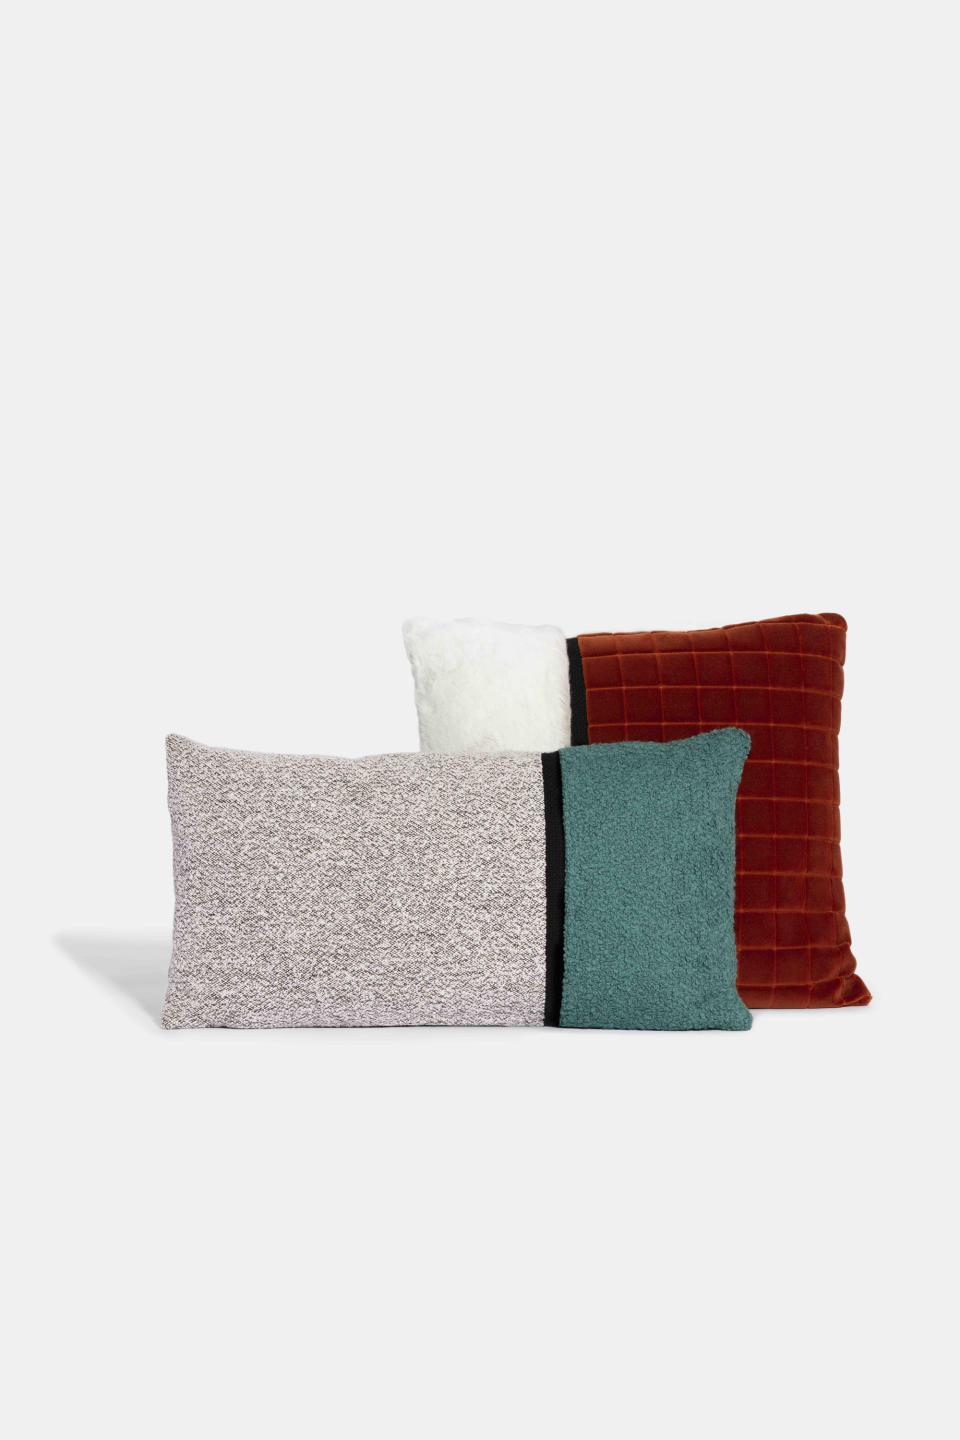 This image provided by Marrimor Objects shows Marrimor pillows. The collection features toss pillows that combine two different but equally soft materials like boucle, wool, velvet and faux fur. (Marrimor Objects via AP)